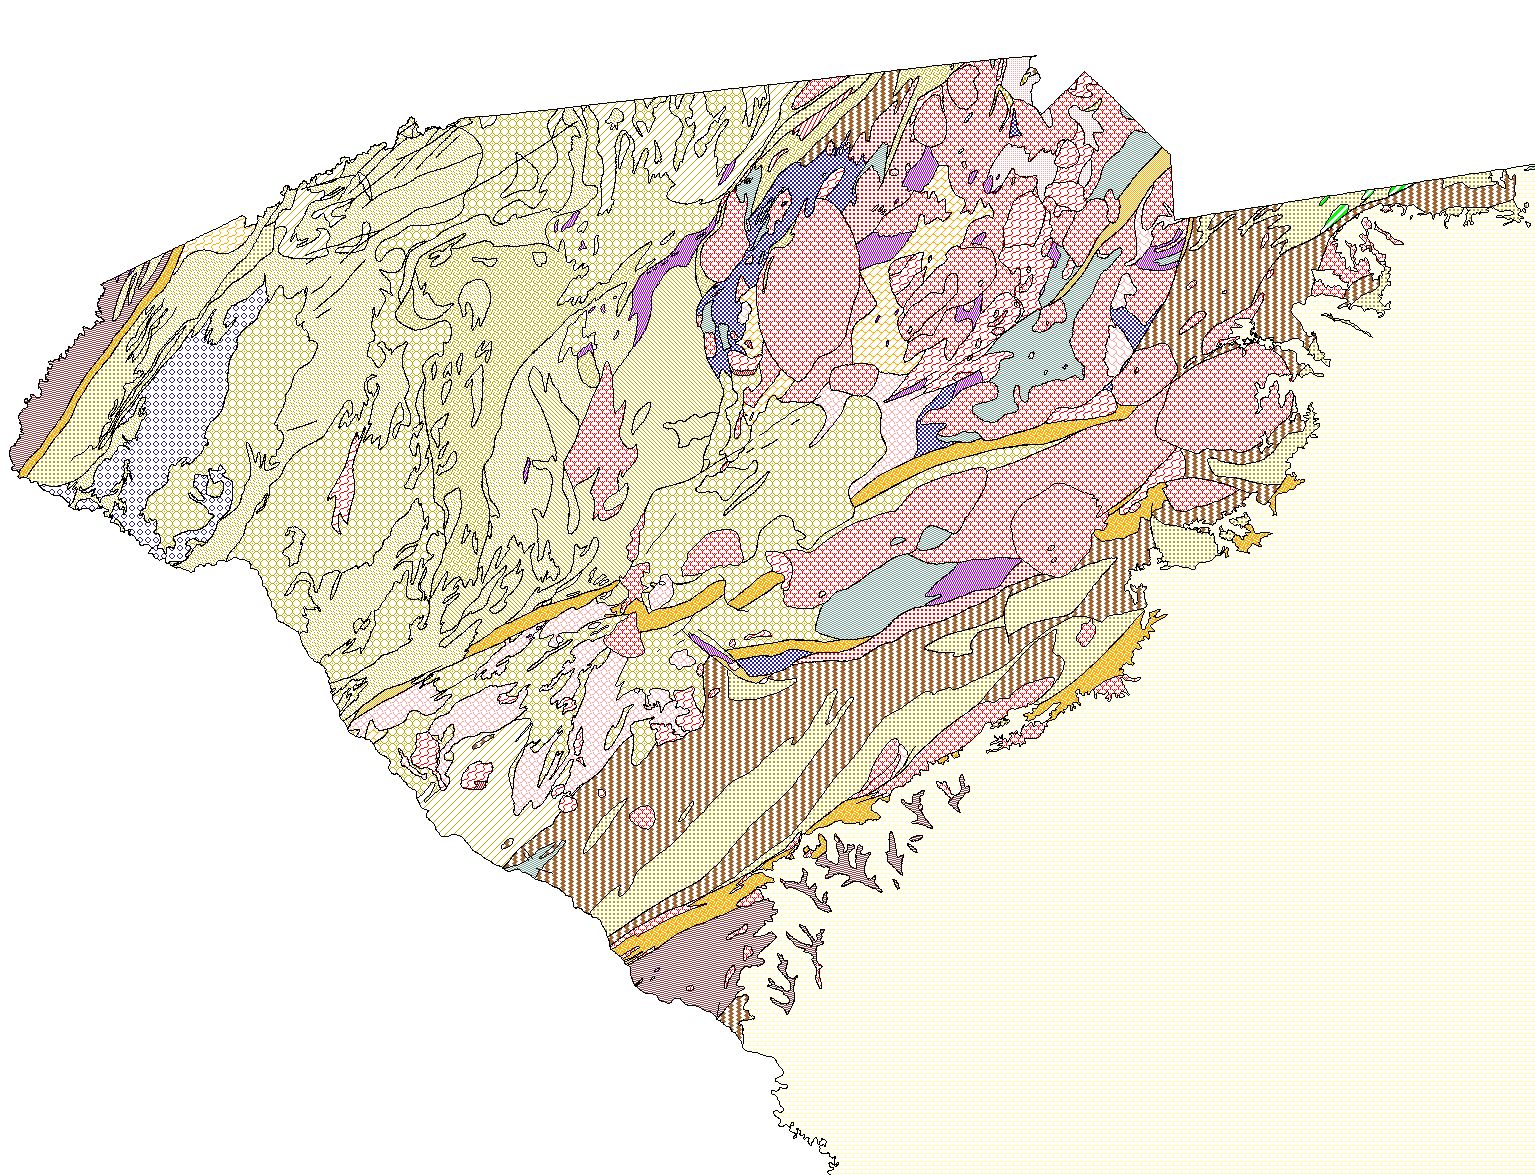 Index map showing lithology
of coverage area in South Carolina